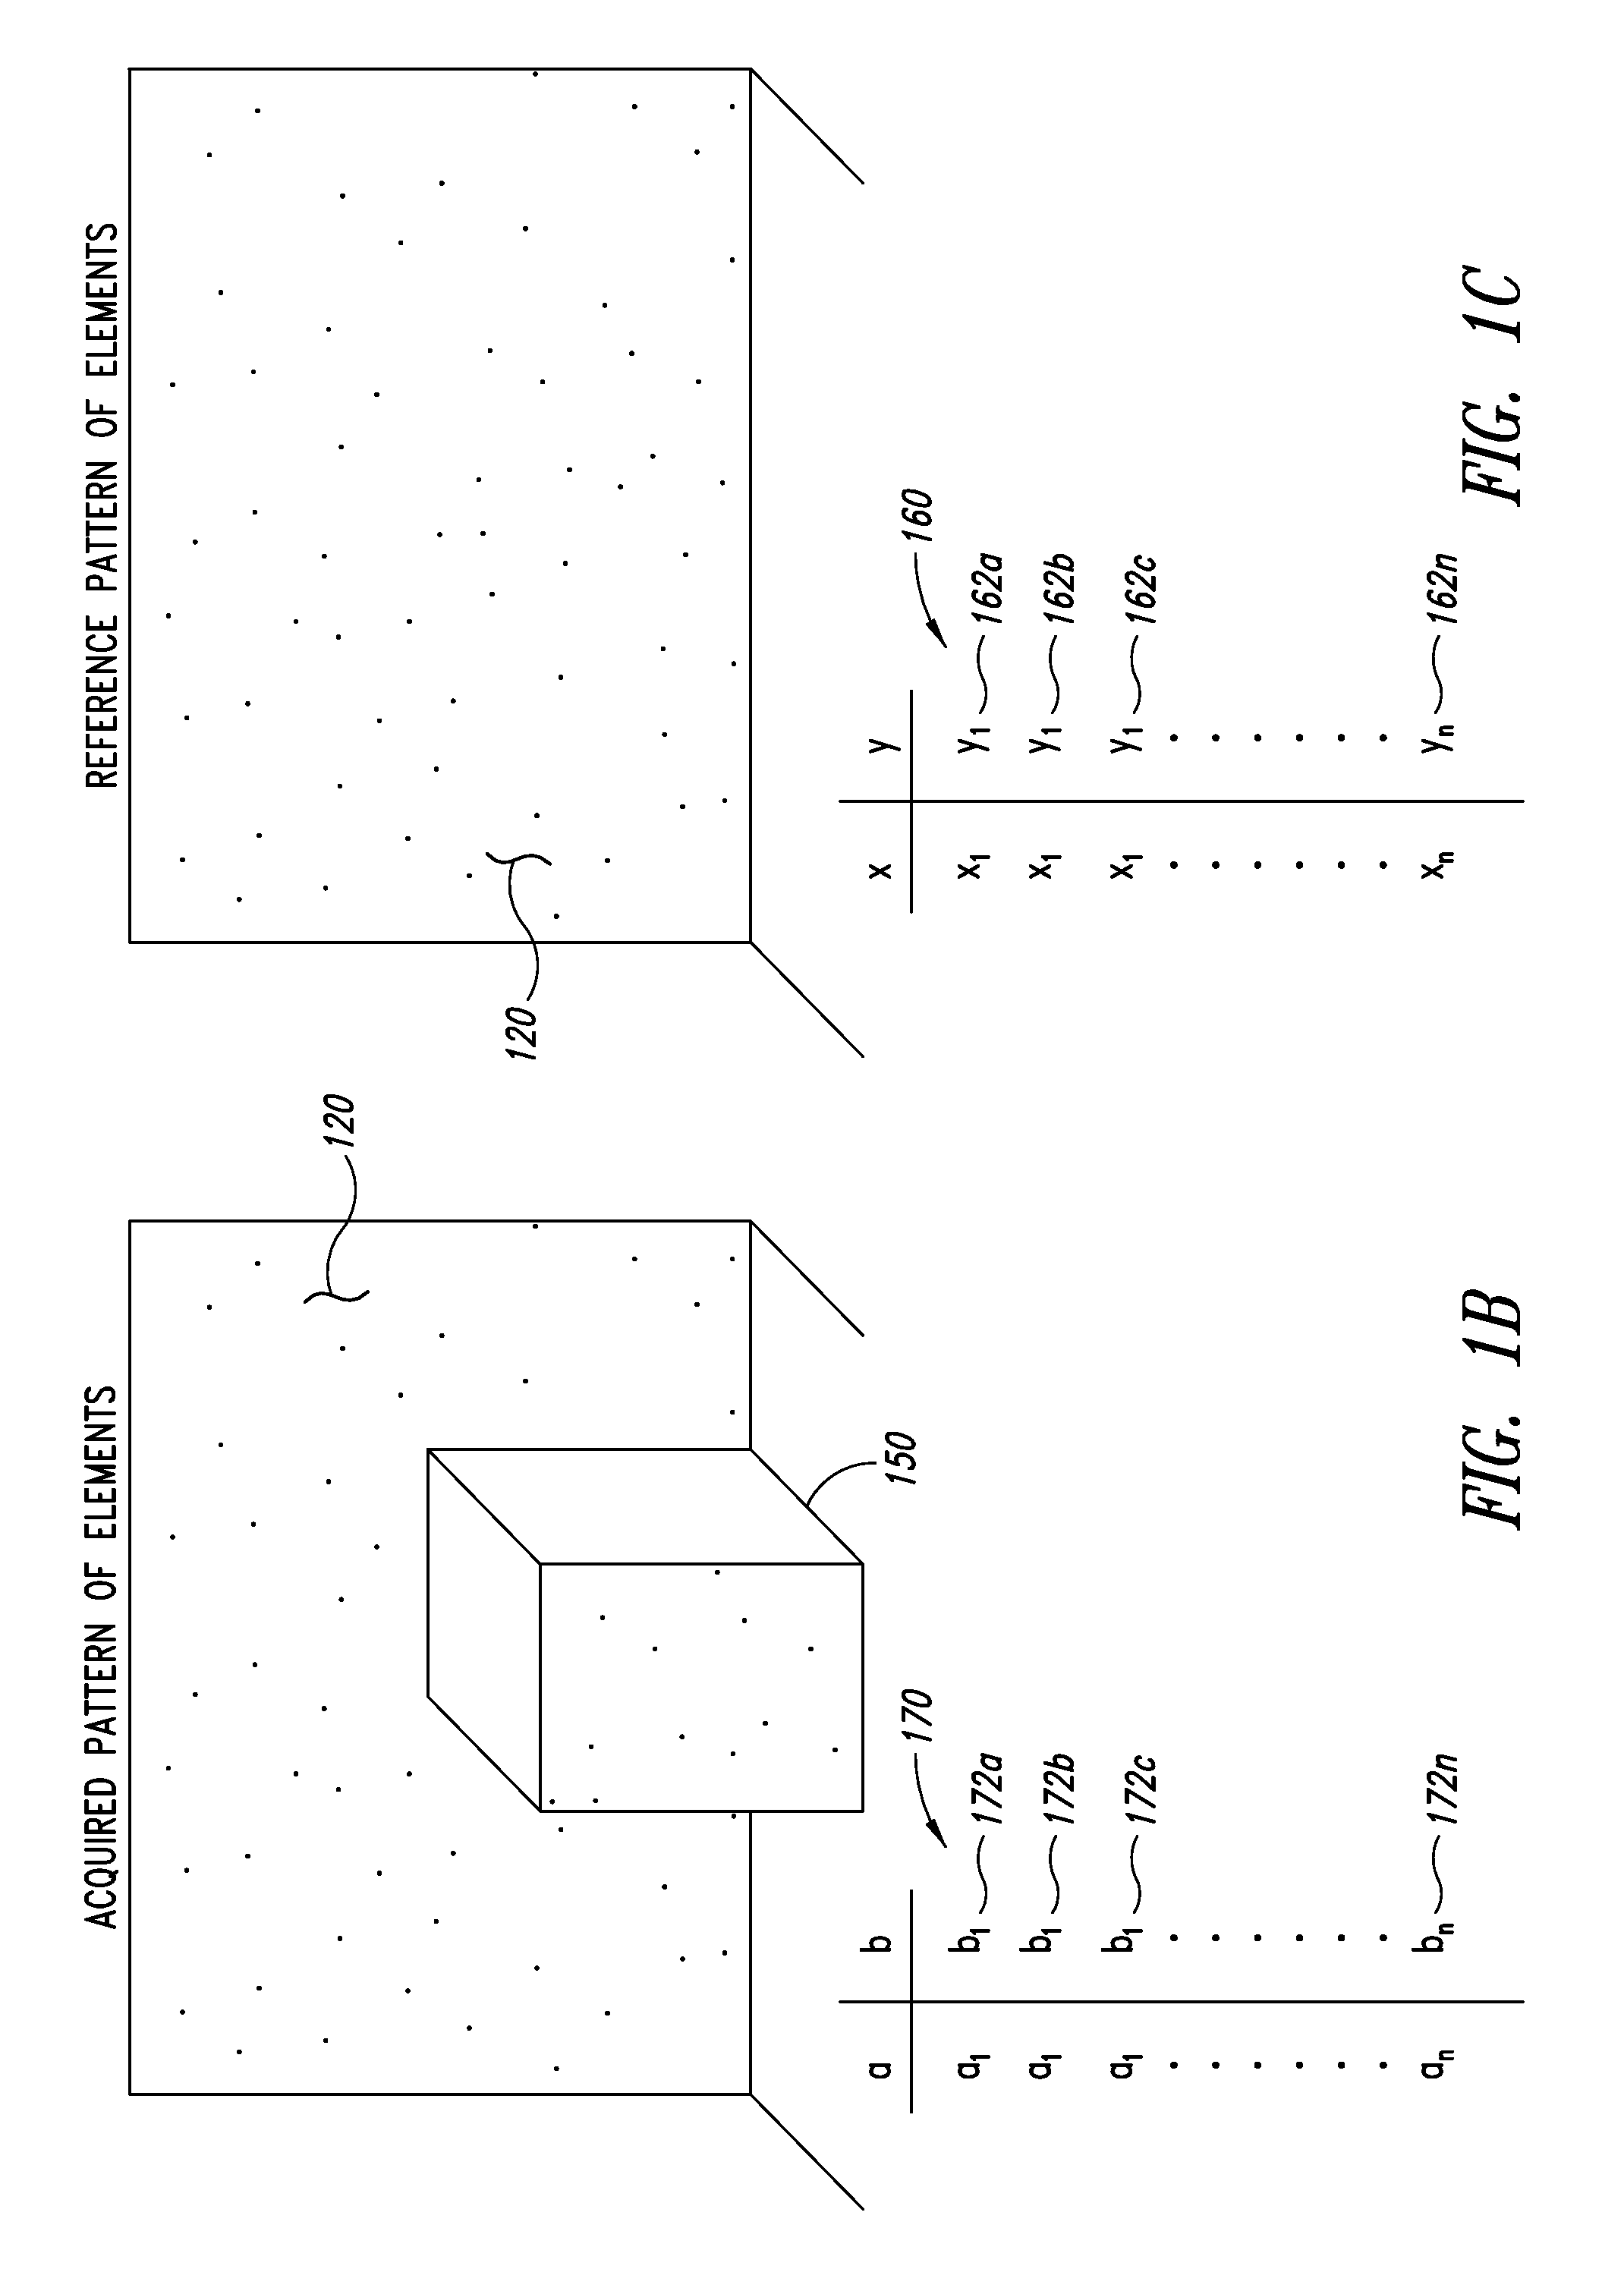 Systems and methods for enhancing dimensioning, for example volume dimensioning